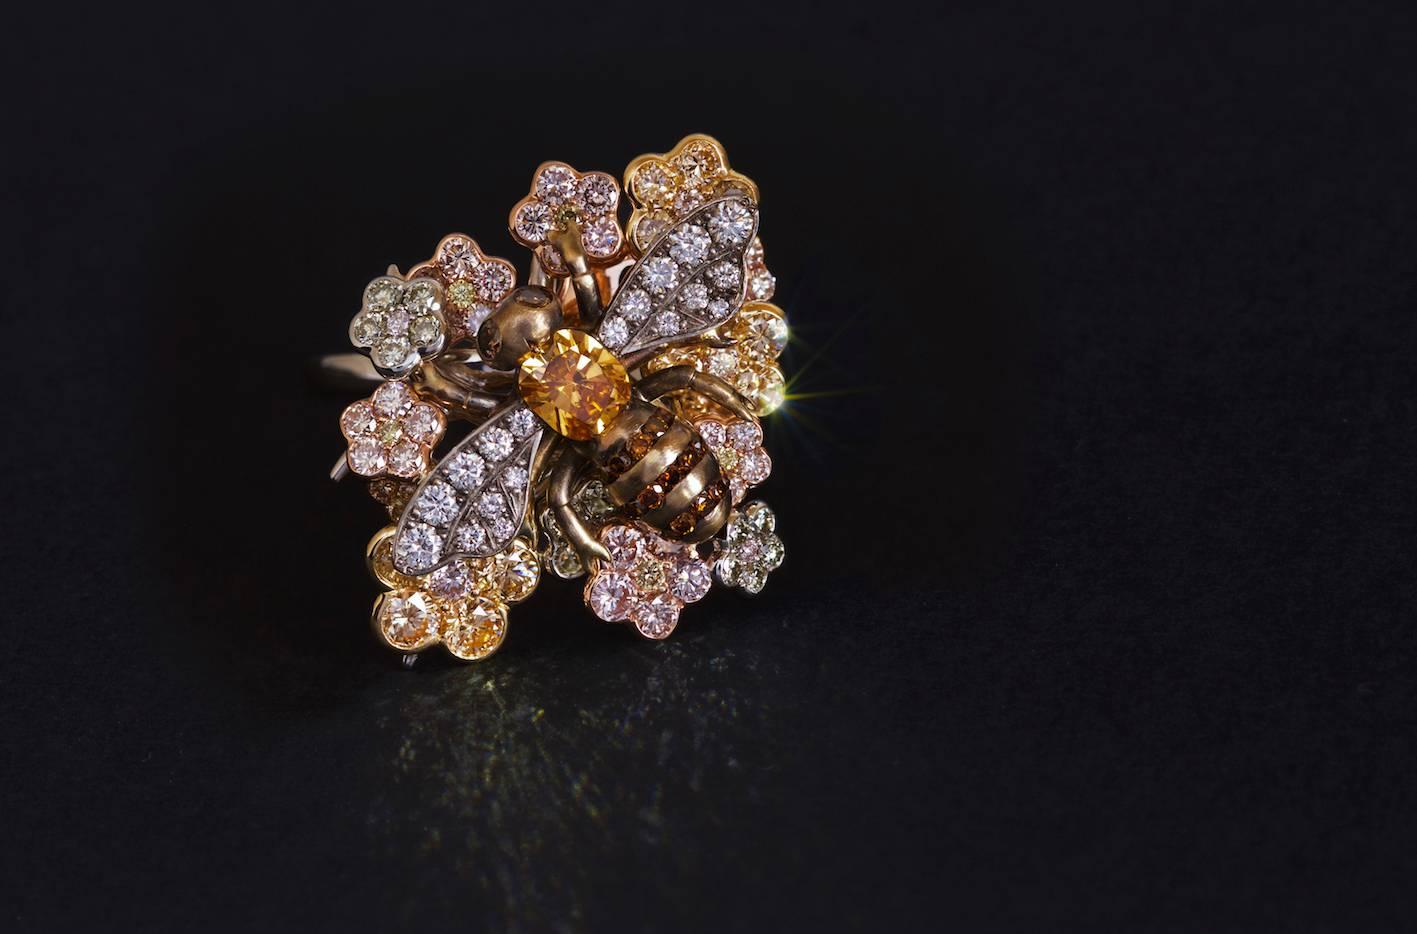 Delightful dress ring with Bee sitting on a flower bed. The Bee's body is a 0.28ct Fancy Vivid Yellowish Orange Diamond ( GIA Cert ) of SI1 clarity. Three rows of Champagne Diamonds form the strips in its abdomen and an upside down Diamond its sting